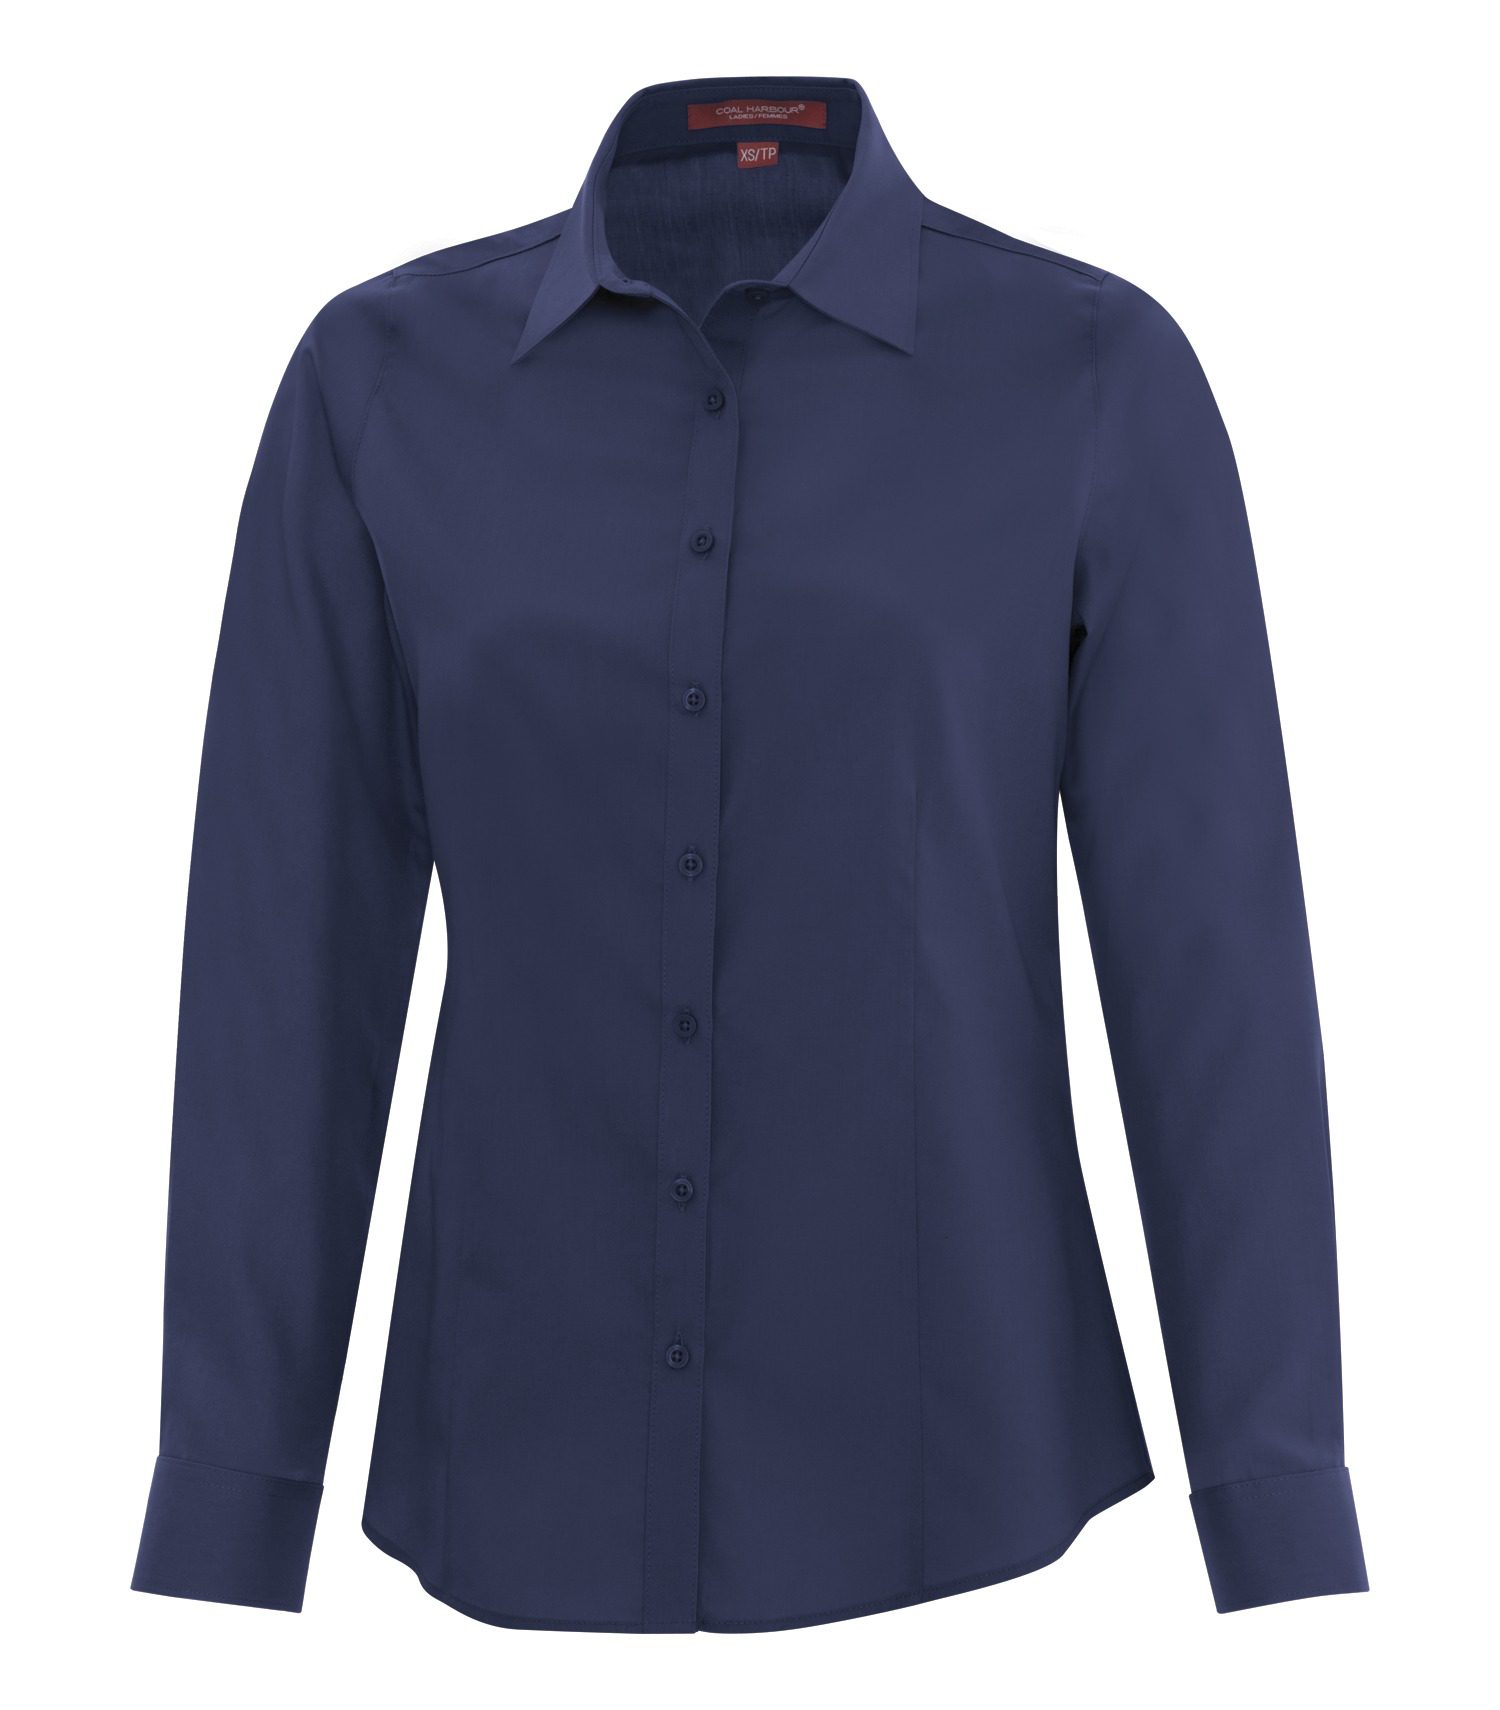 COAL HARBOUR® EVERYDAY LONG SLEEVE LADIES' WOVEN SHIRT #L6013 Navy